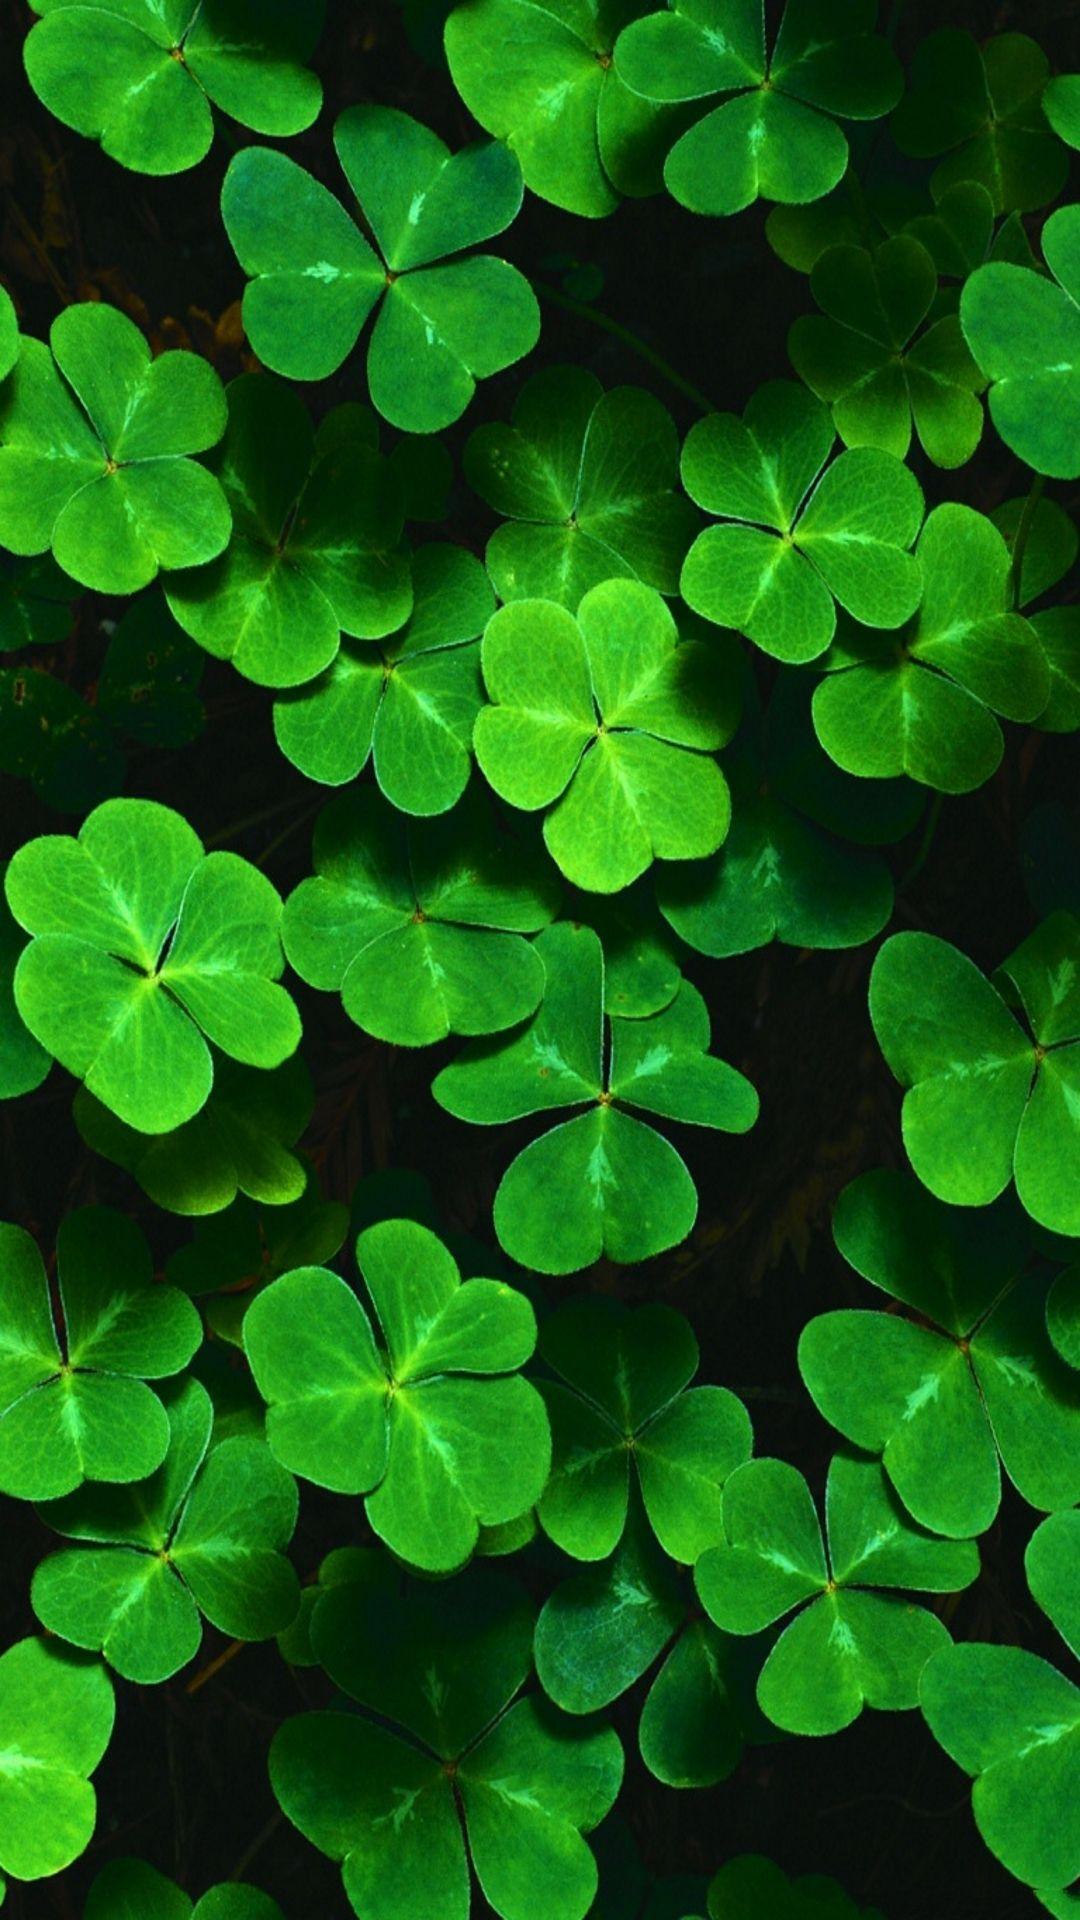 Free St. Patrick's Day Wallpapers - Wallpaper Cave